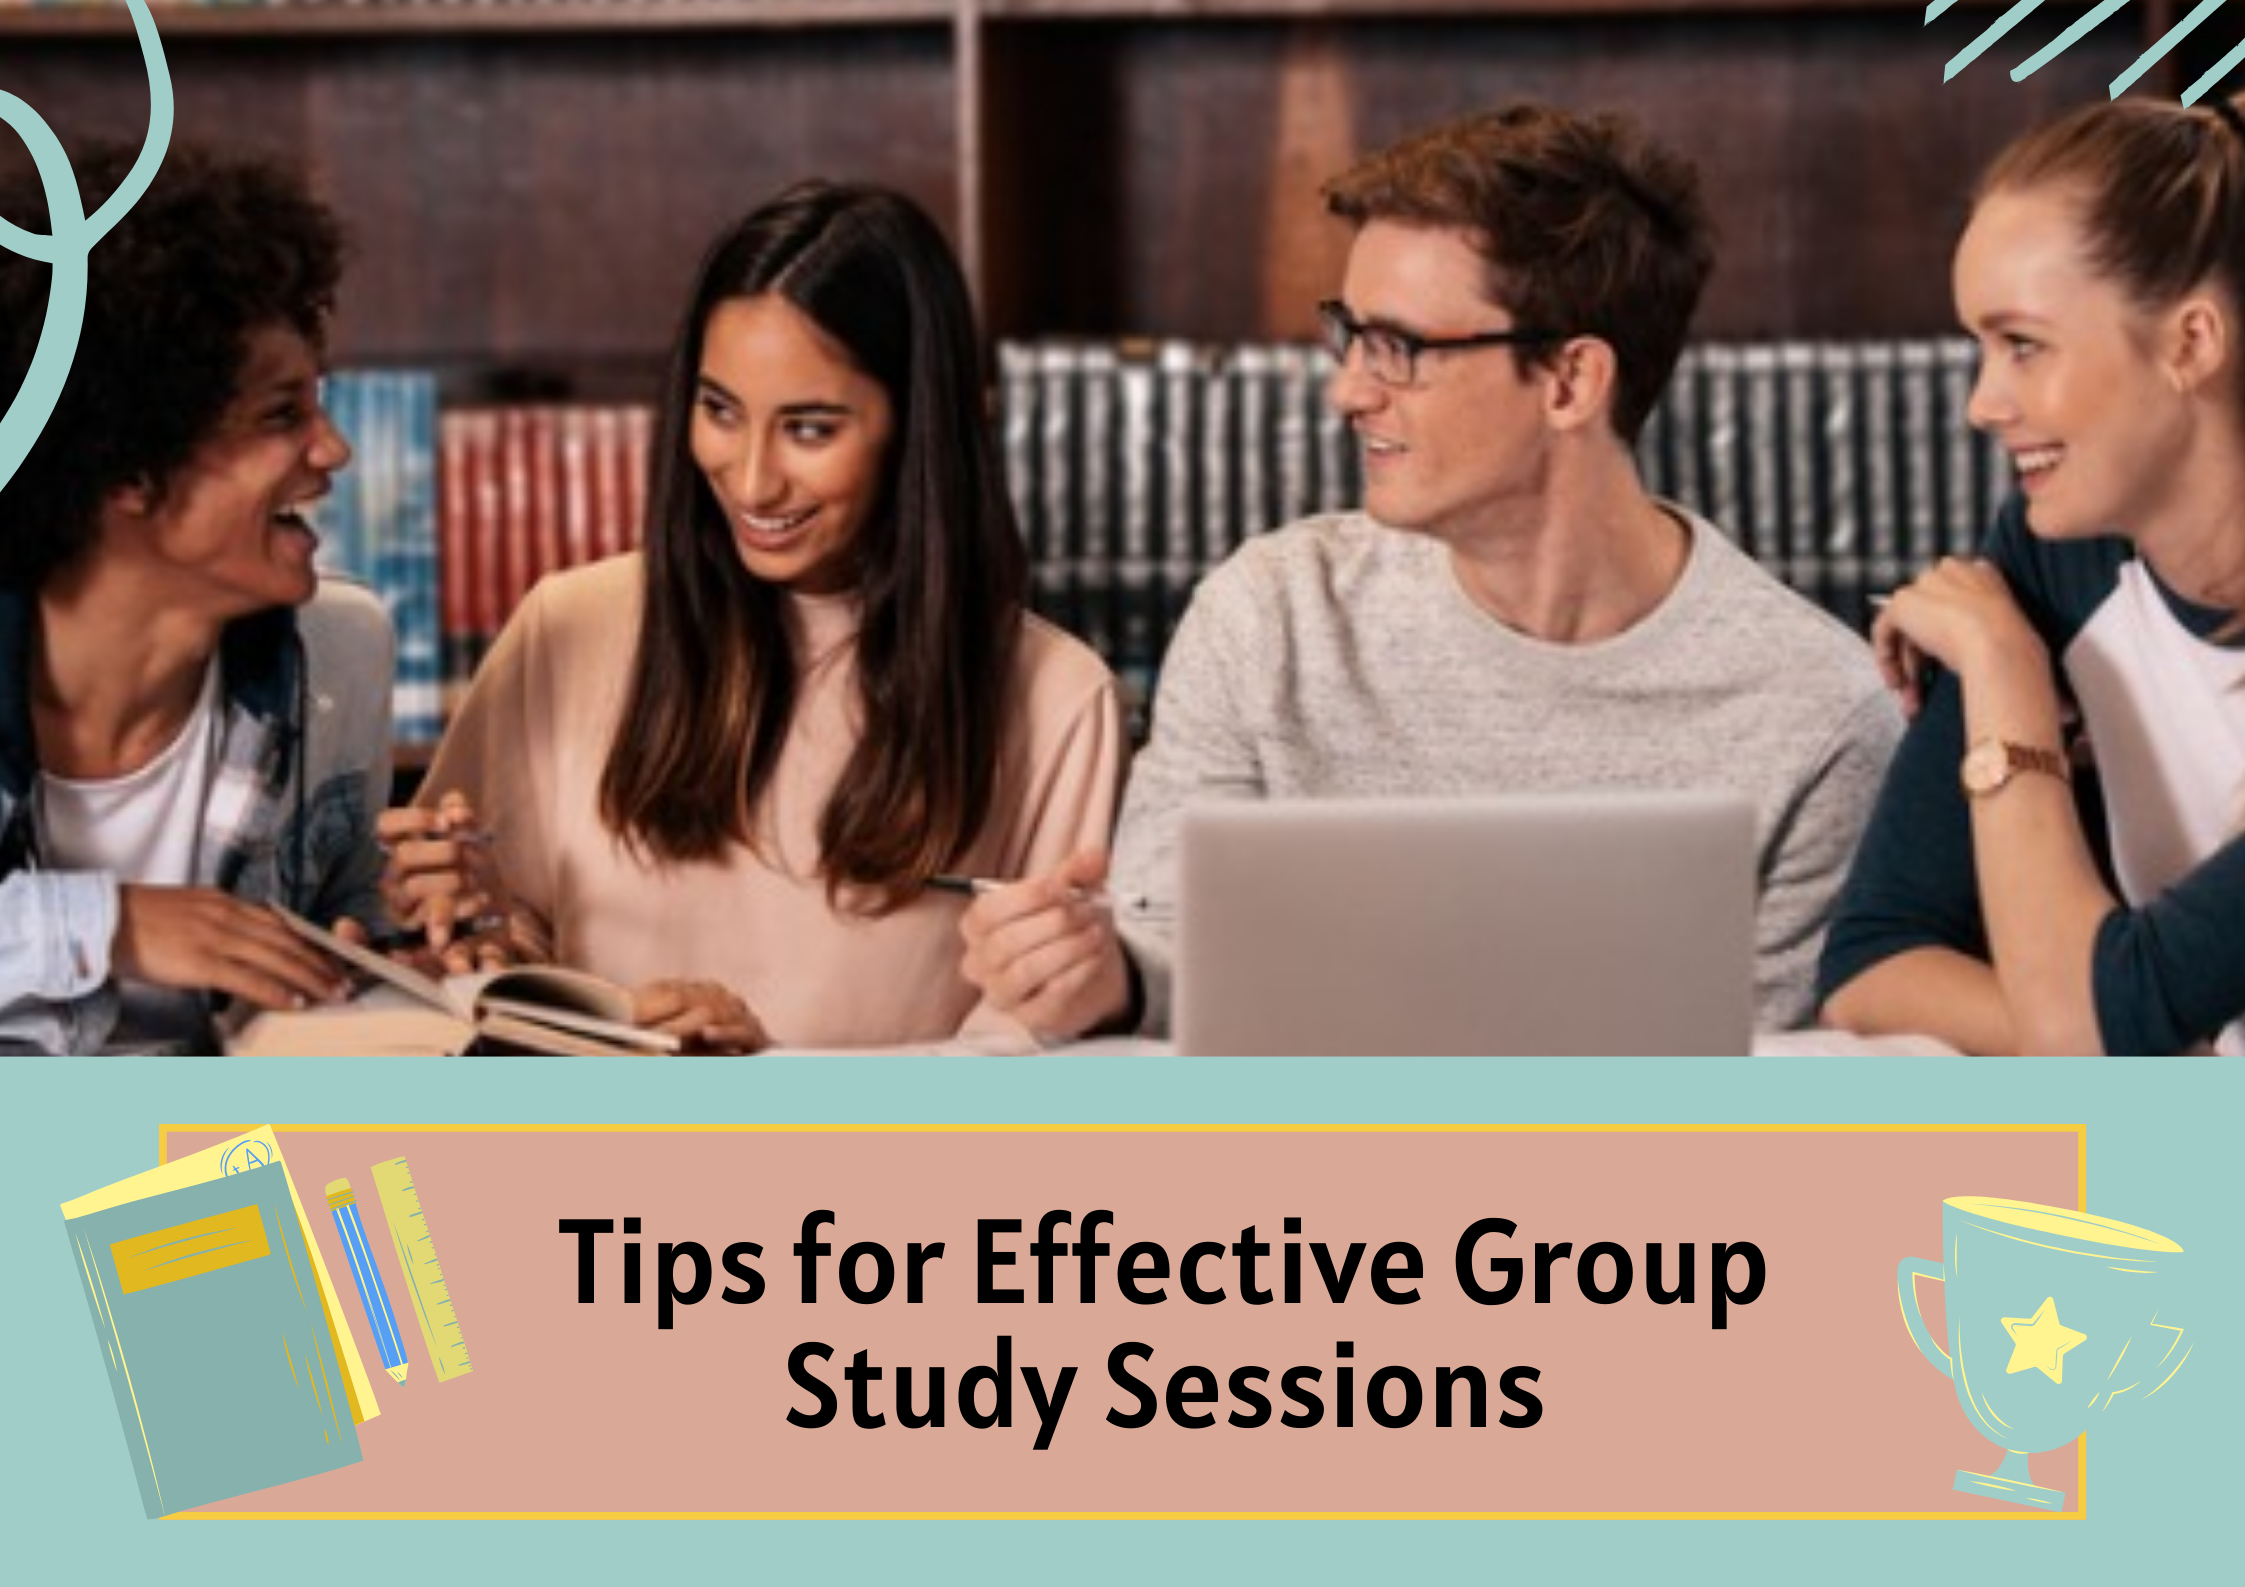 You are currently viewing Tips for Effective Group Study Sessions